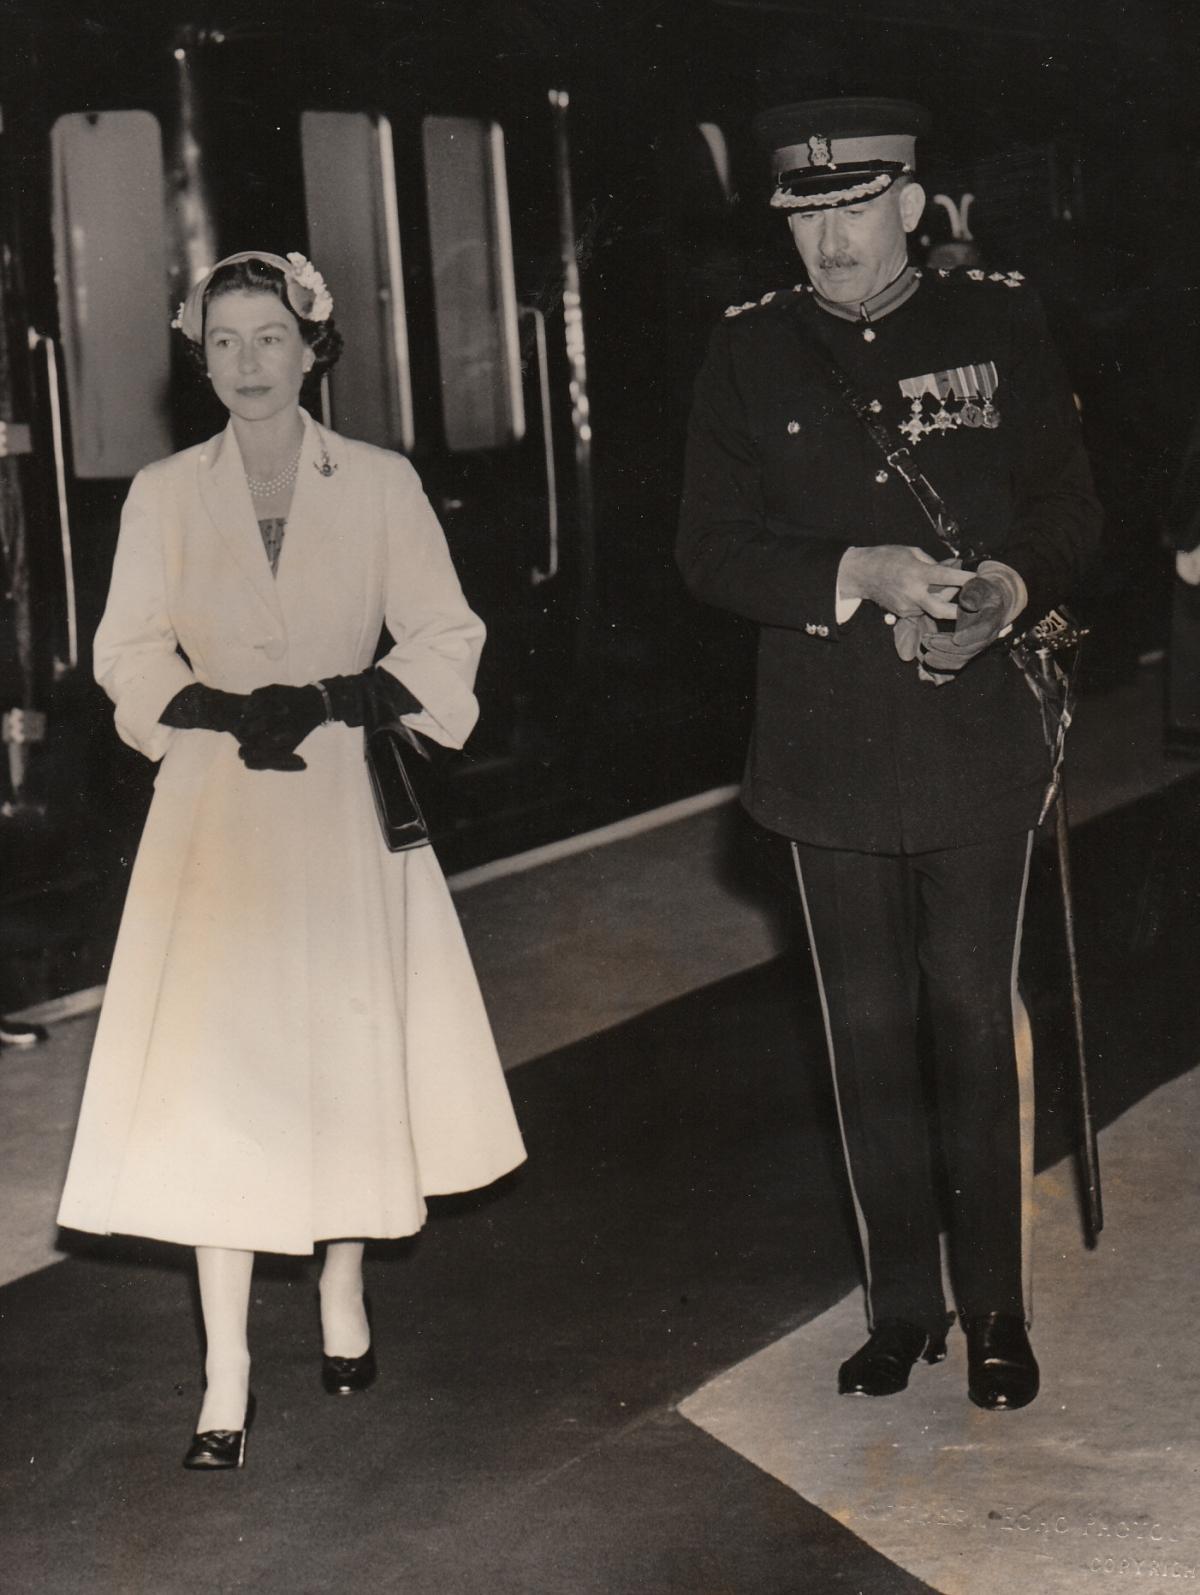 The Queen arrives at Stockton station on June 4, 1956, where she is met by Brig RGW Nelson